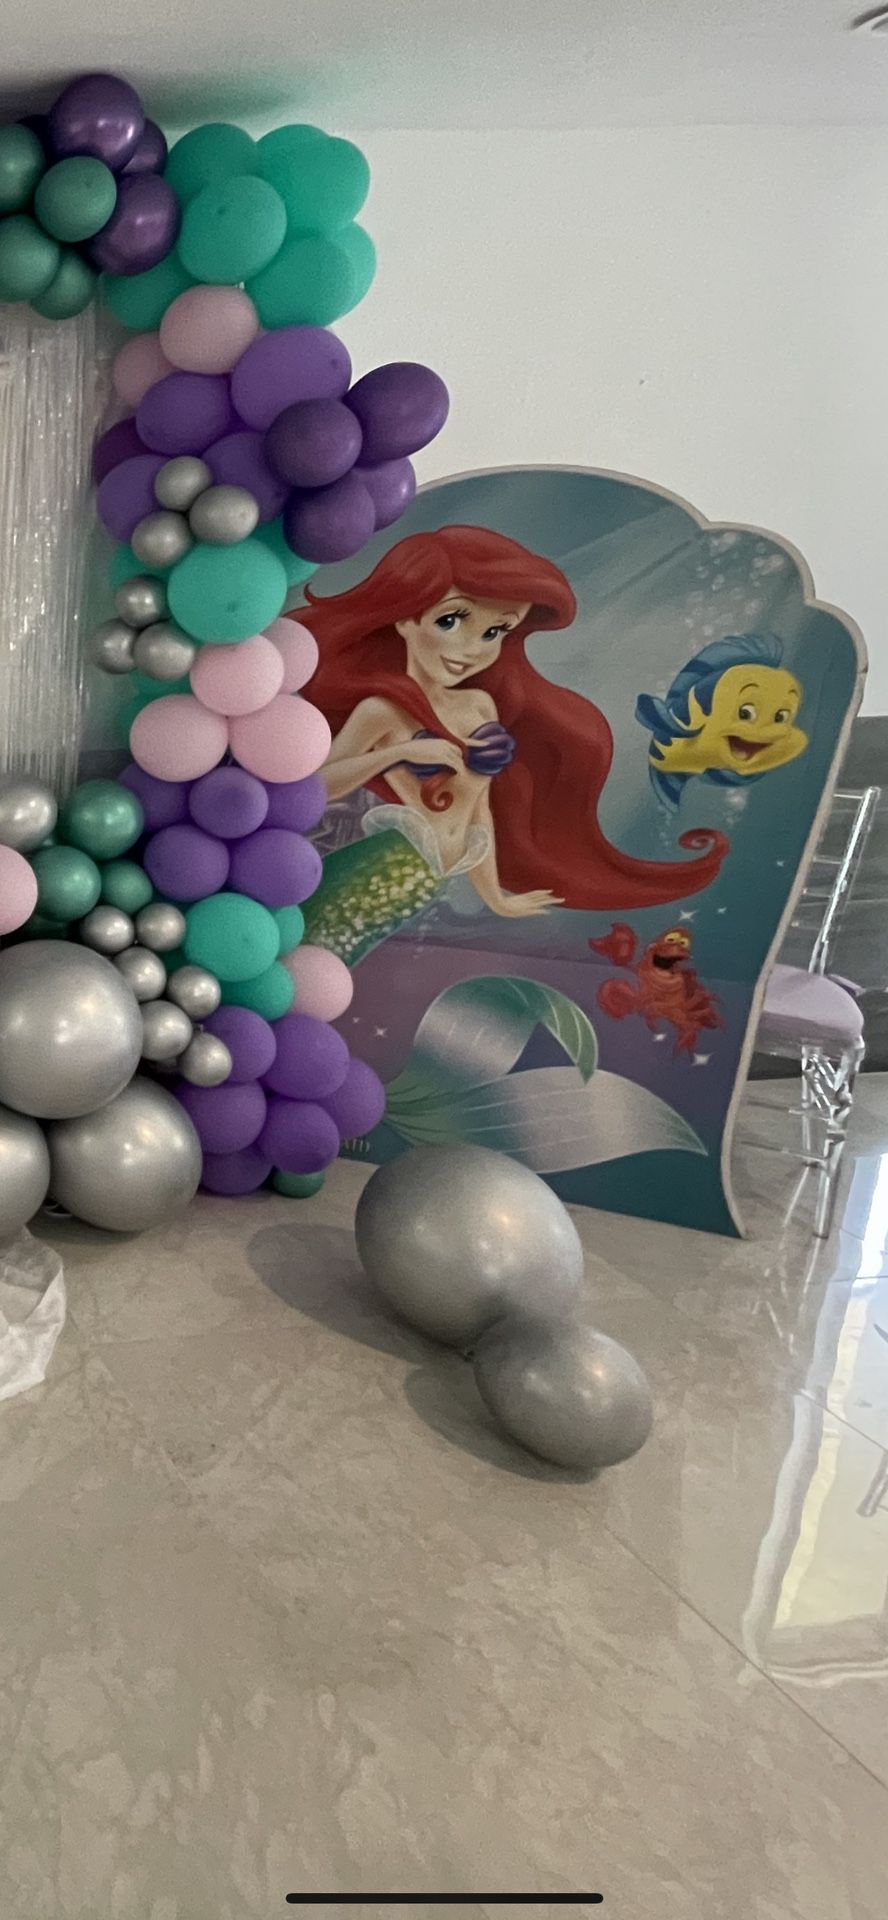 Under The Sea Party Supplies